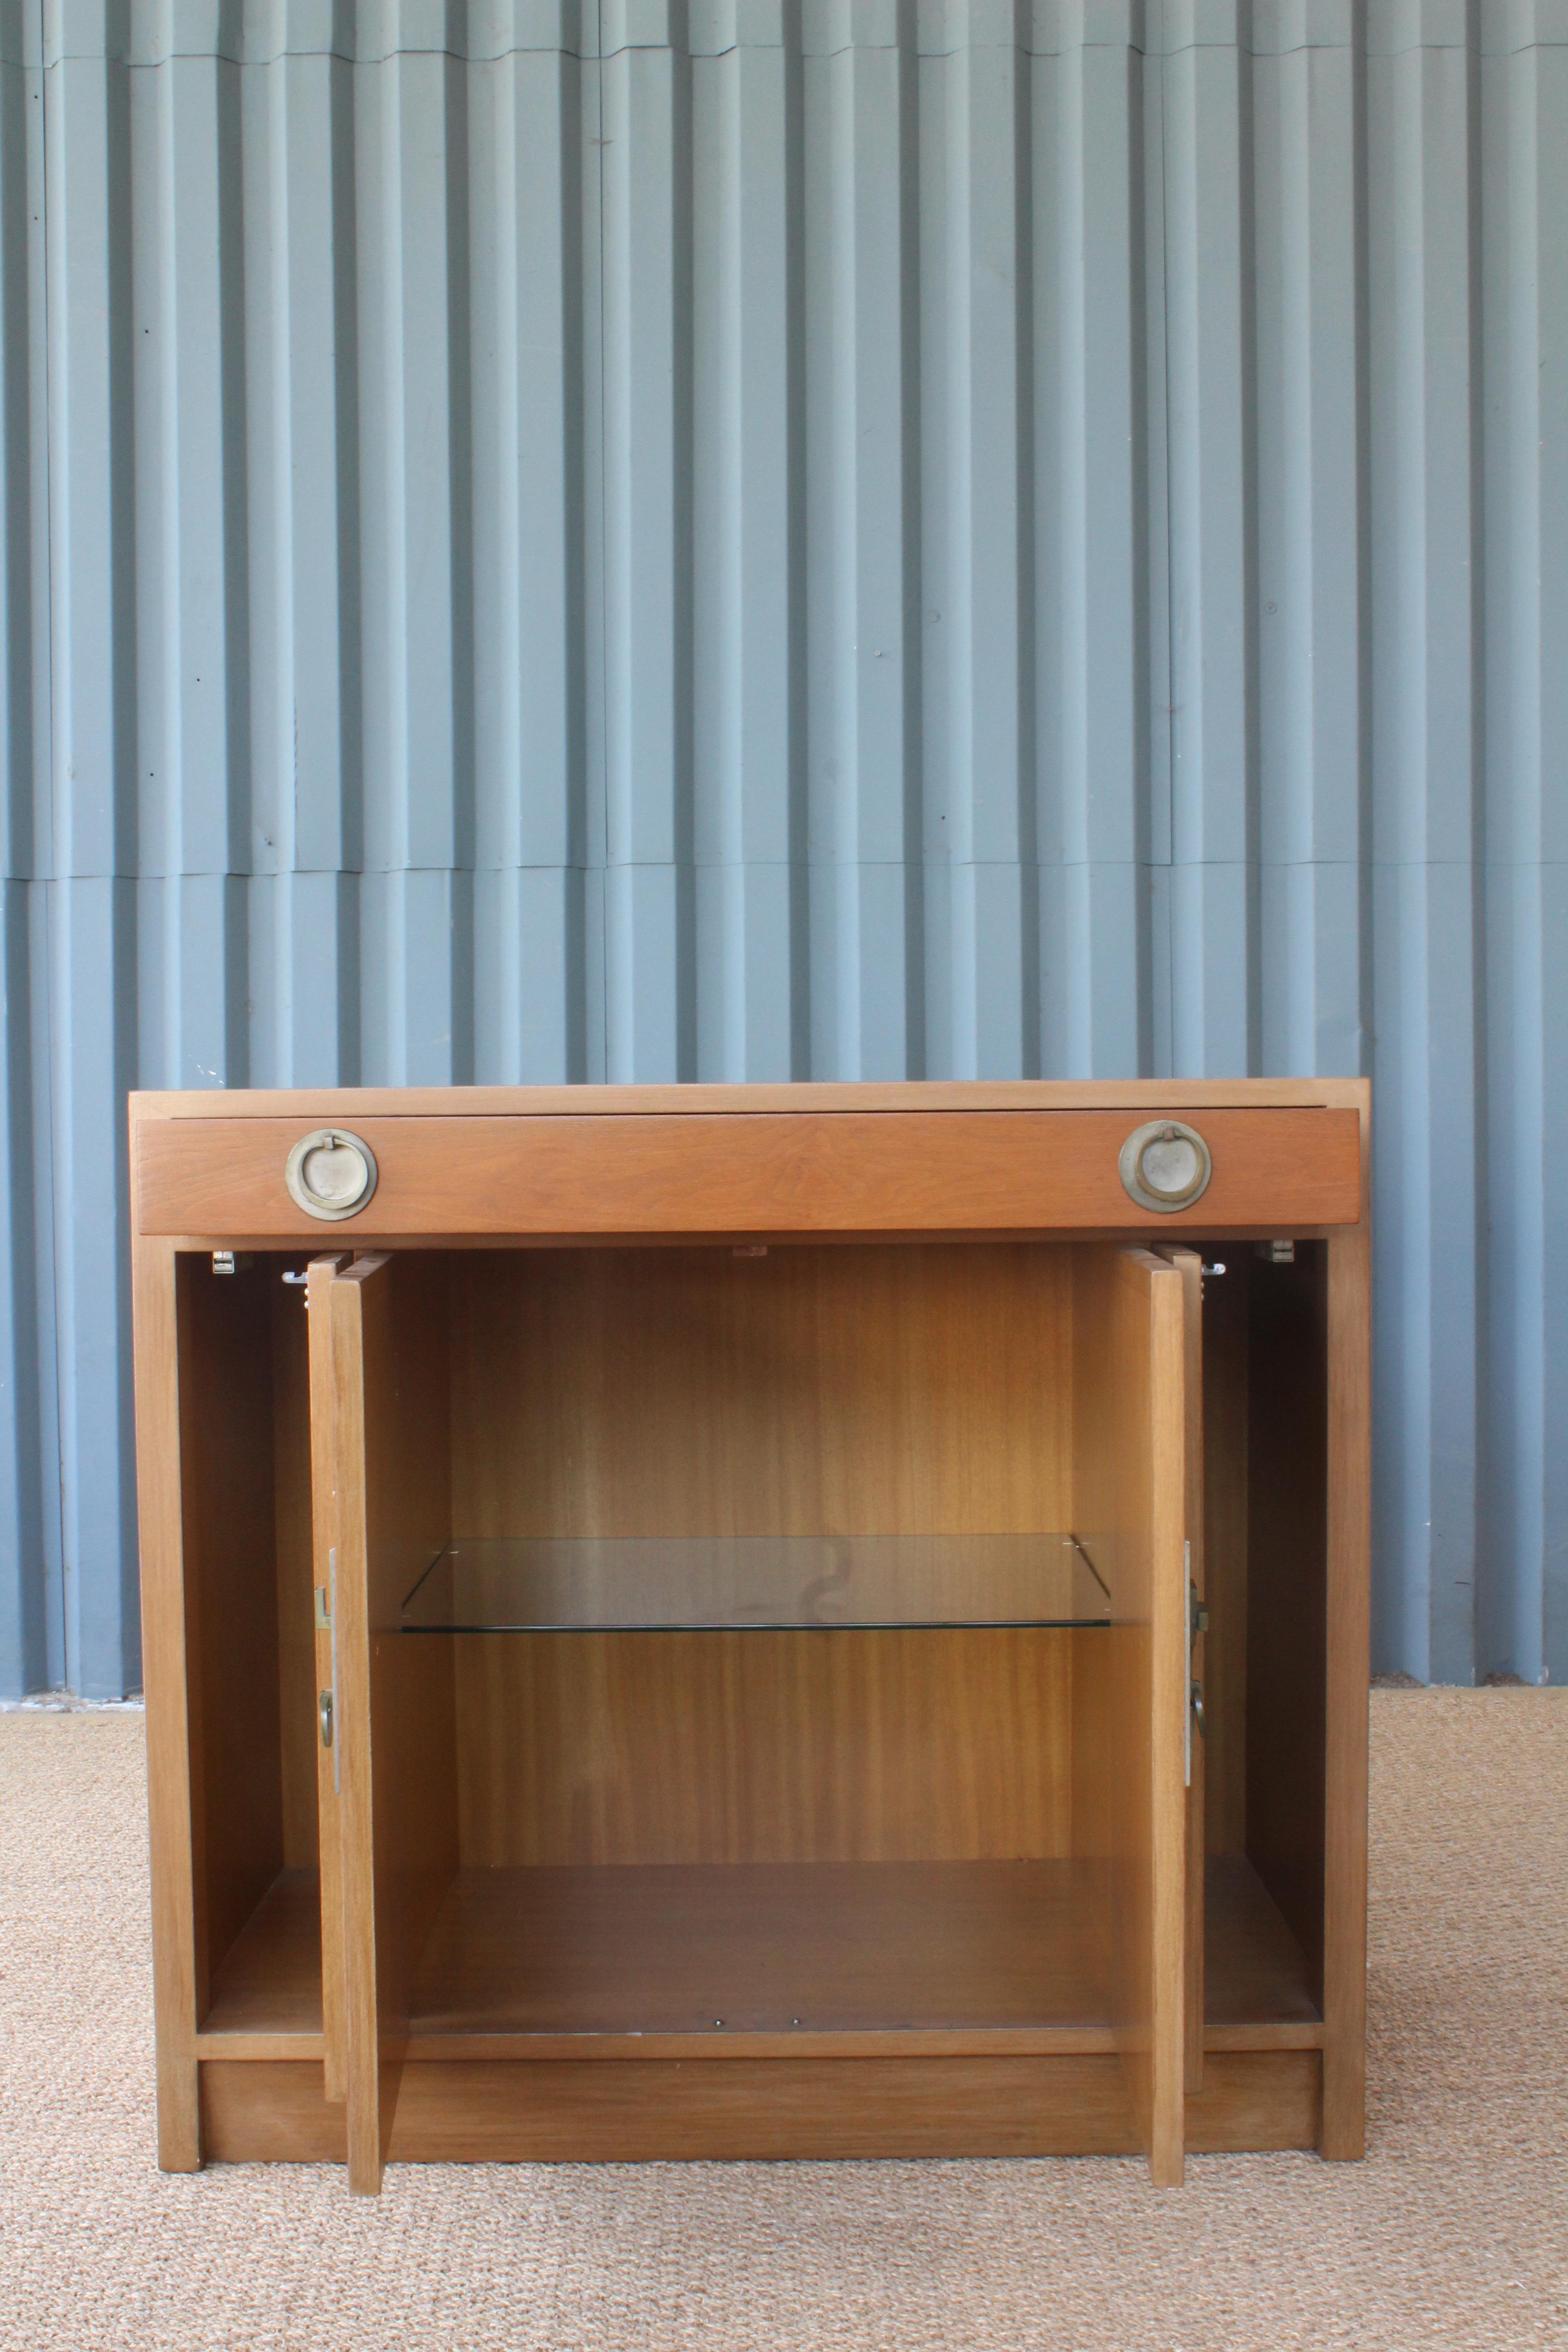 Asian inspired cabinet or dry bar designed by Edward Wormley for Dunbar, 1950s. Wonderful original condition. Includes a top drawer, two side compartments and a centre section with an adjustable glass shelf.